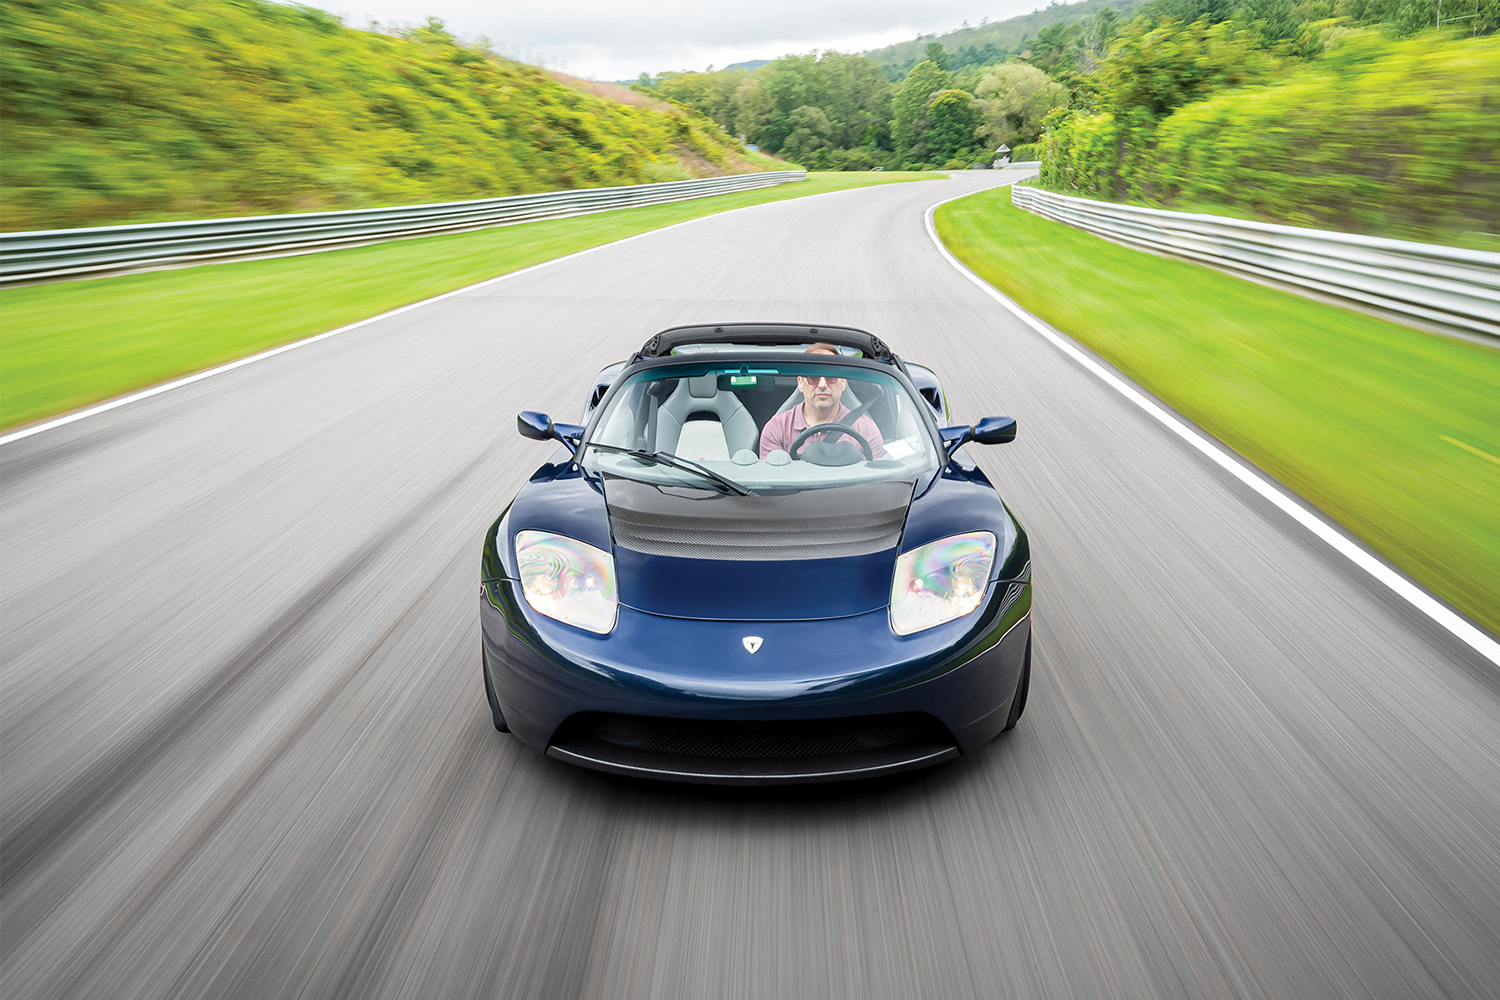 A 2010 Tesla Roadster Sport, one of the earliest electric cars from Elon Musk's Tesla, driving fast down a racetrack. The EV is on Hagerty's 2022 Bull Market List.